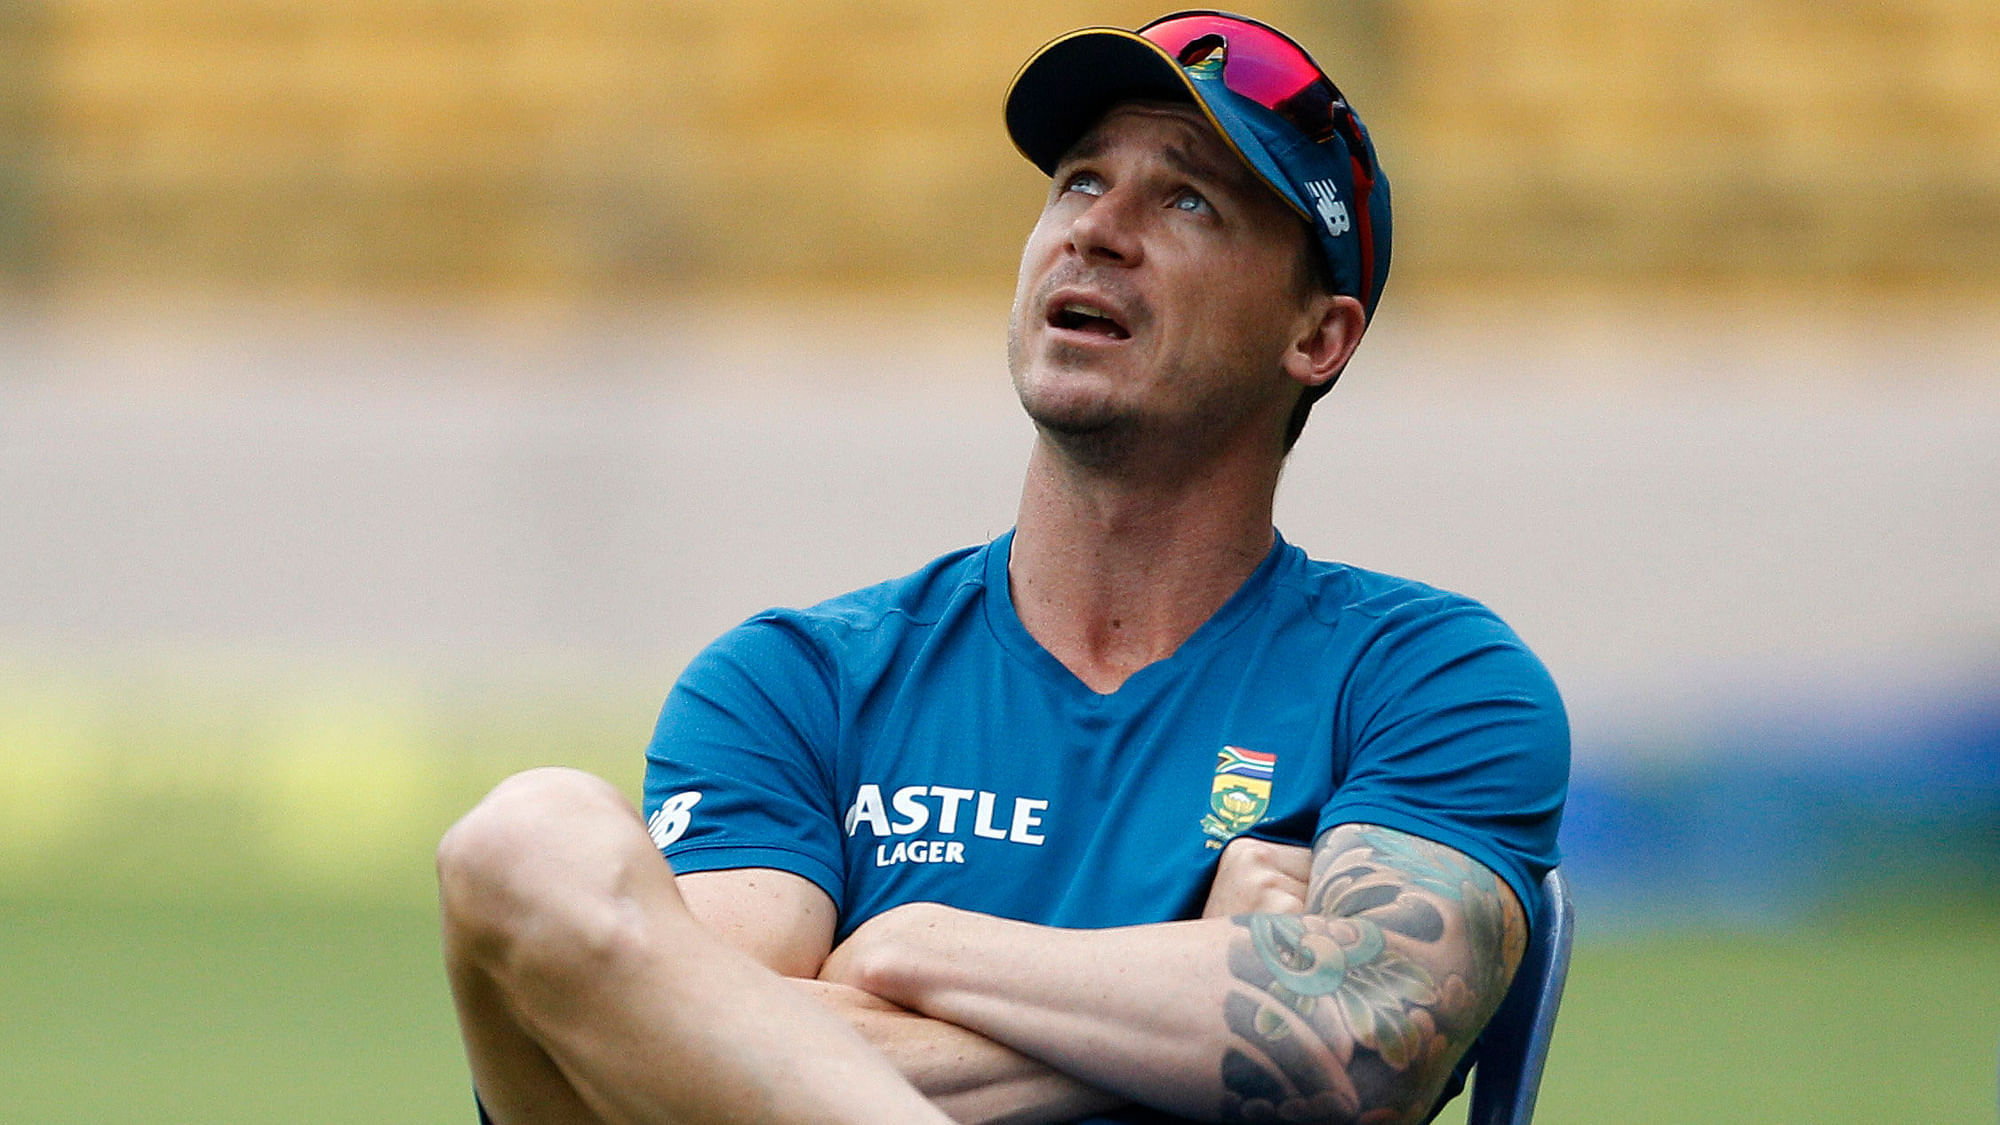 Dale Steyn is one among the 7 players who have listed their base price at Rs 2 crore.